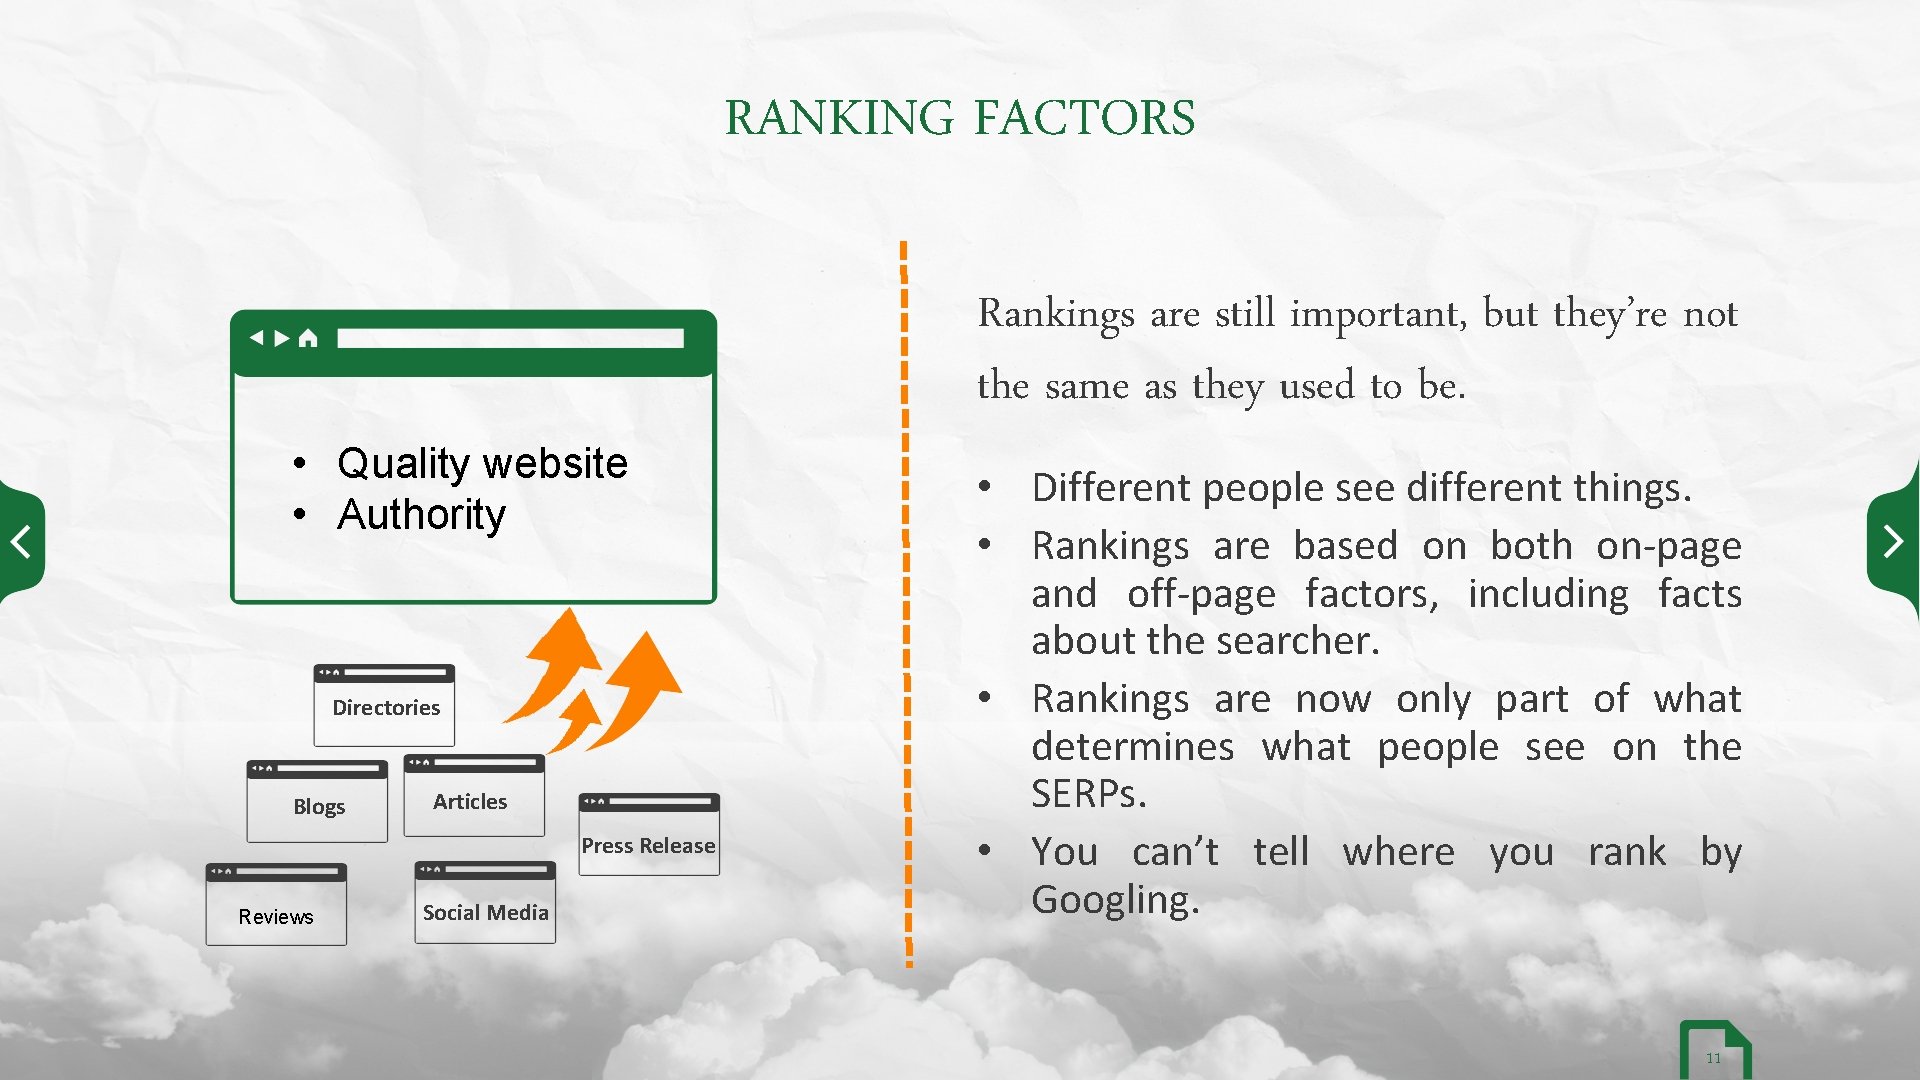 RANKING FACTORS Rankings are still important, but they’re not the same as they used